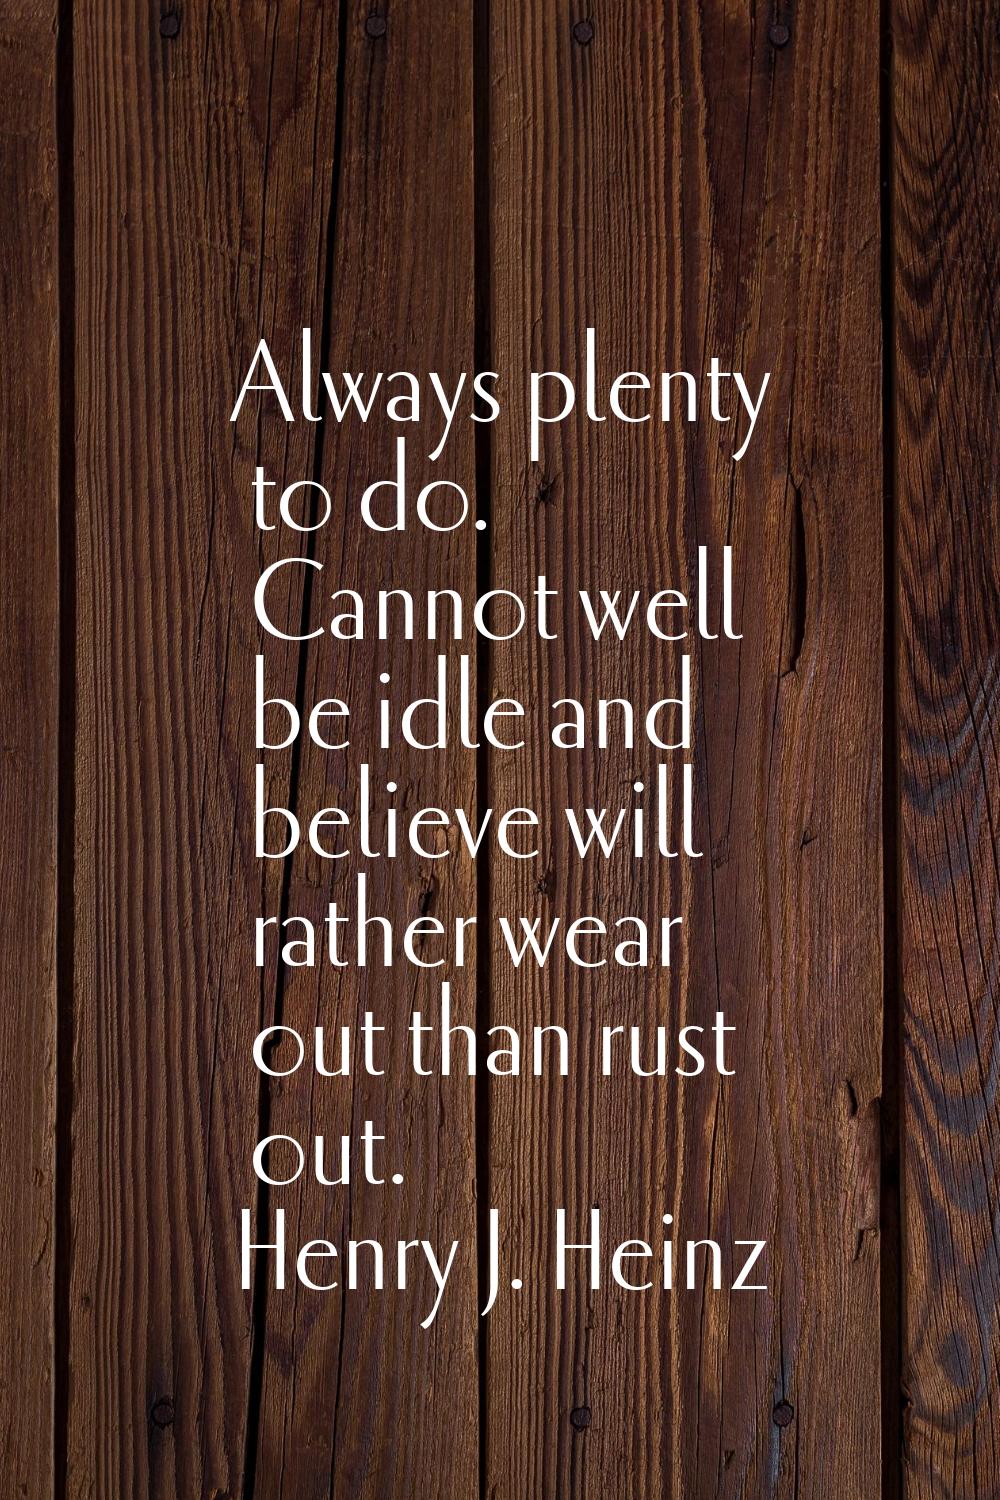 Always plenty to do. Cannot well be idle and believe will rather wear out than rust out.